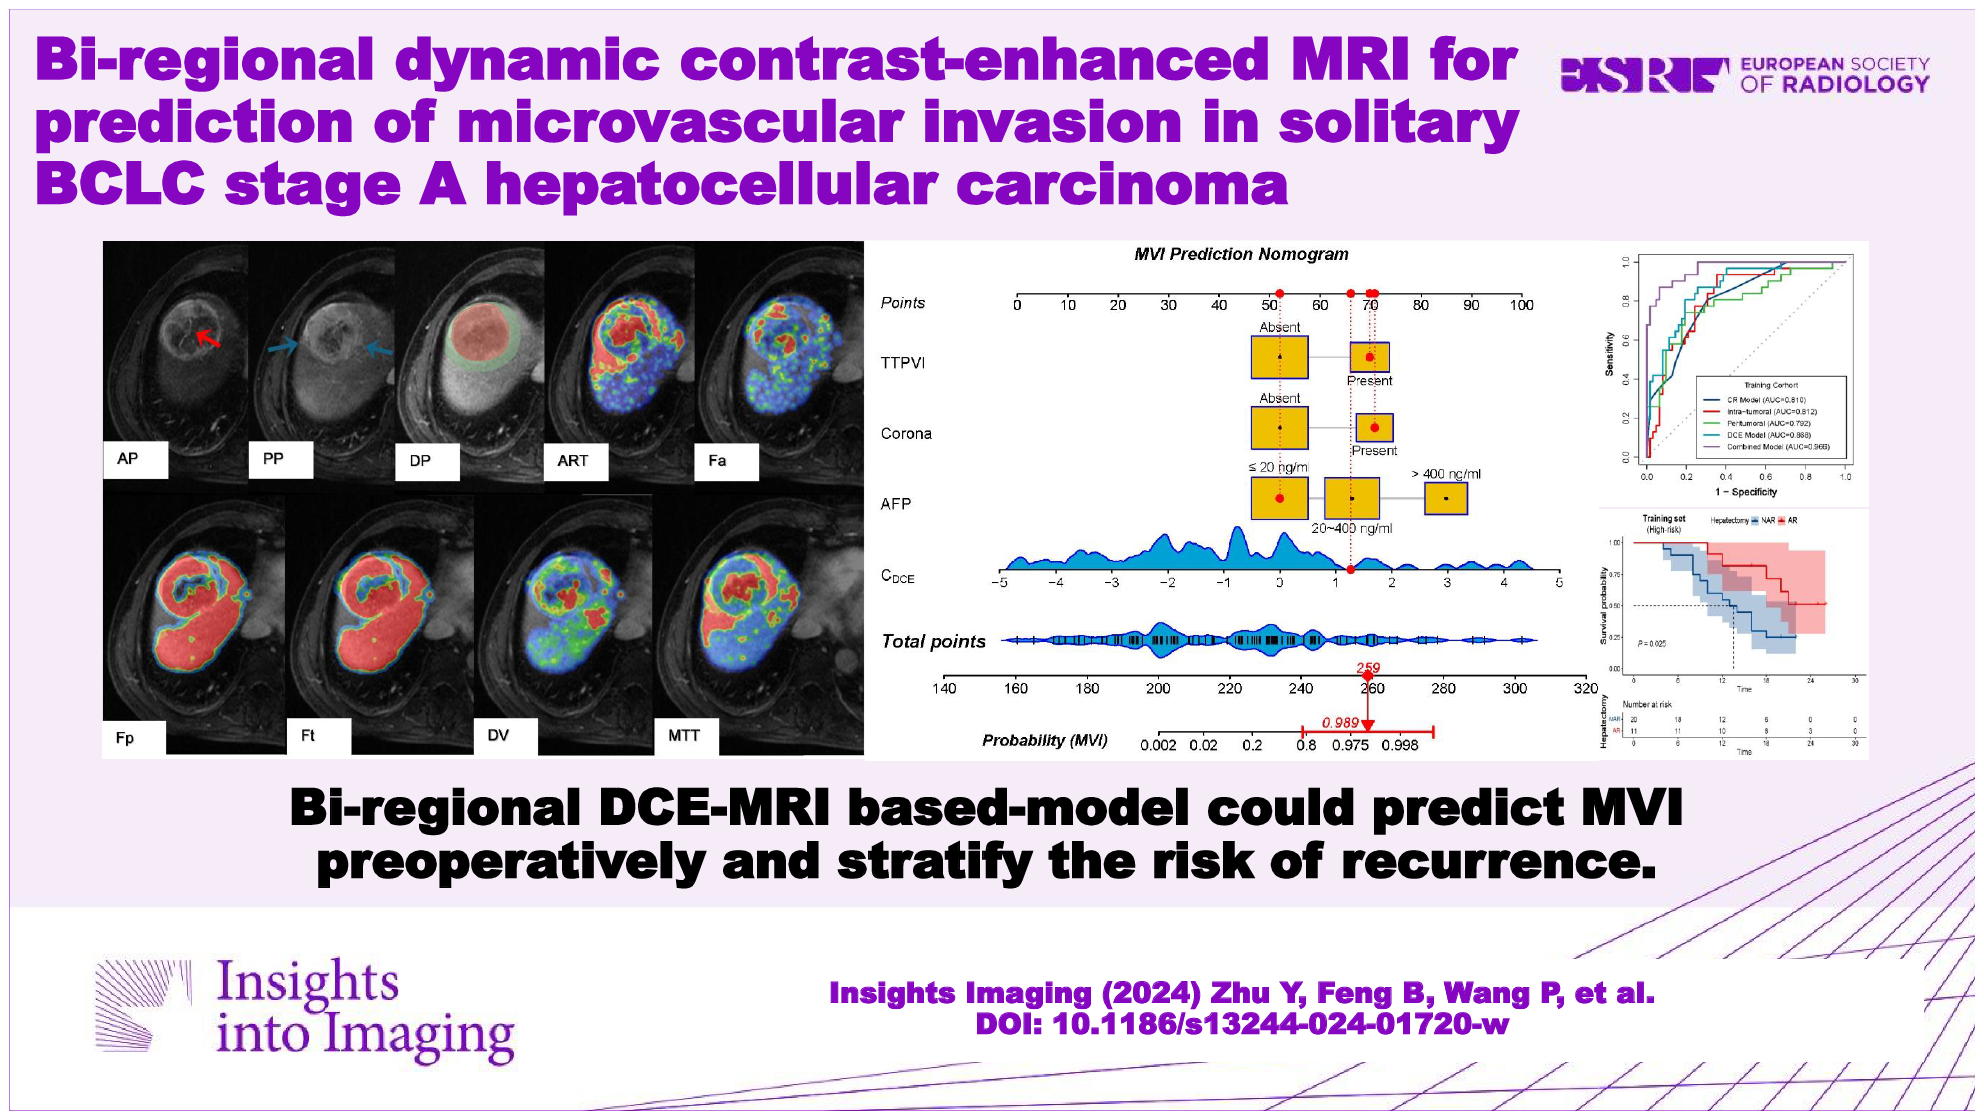 Bi-regional dynamic contrast-enhanced MRI for prediction of microvascular invasion in solitary BCLC stage A hepatocellular carcinoma